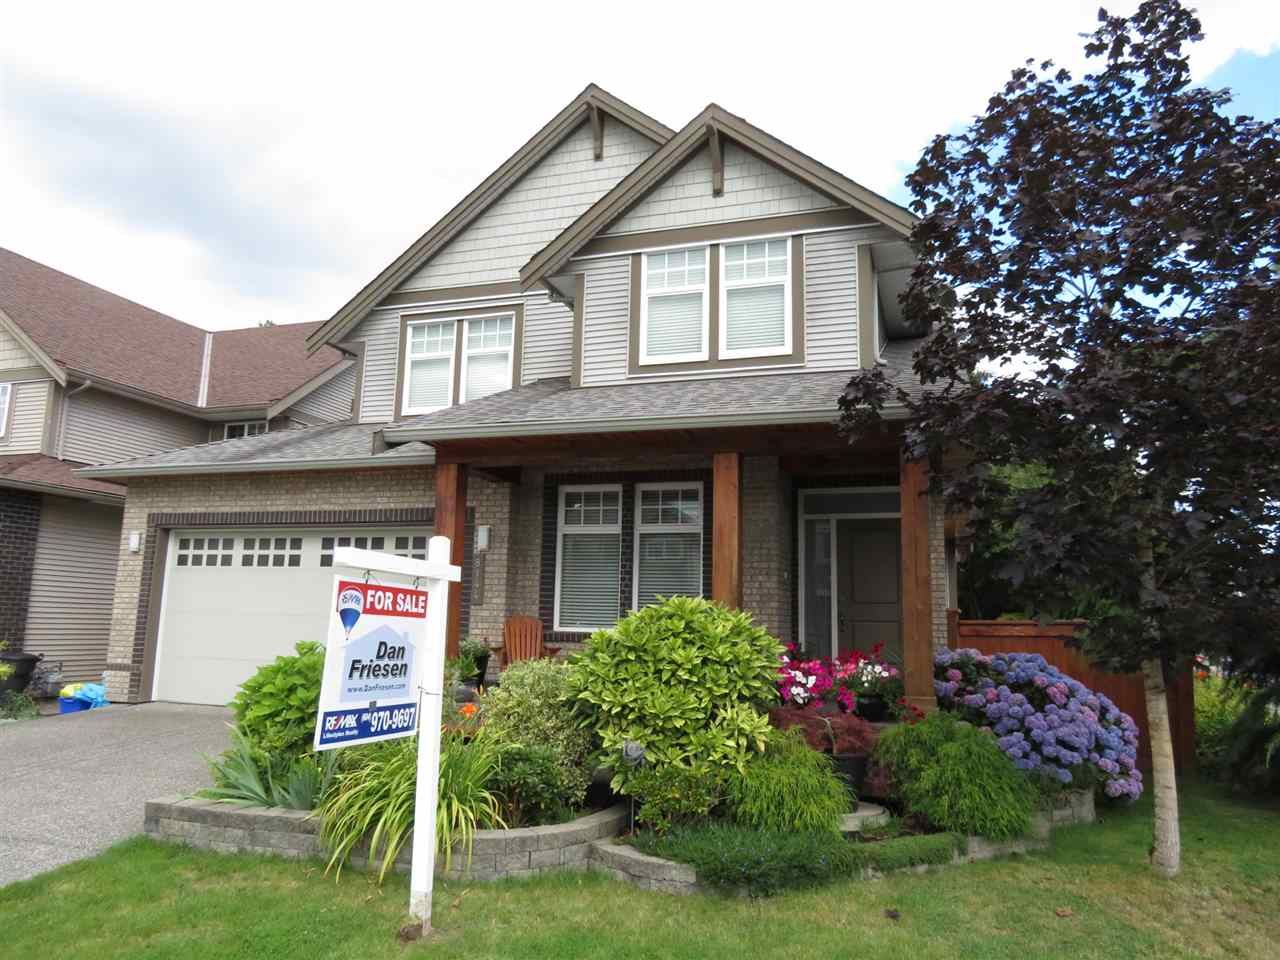 Main Photo: 8144 211 STREET in Langley: Willoughby Heights House for sale : MLS®# R2093922